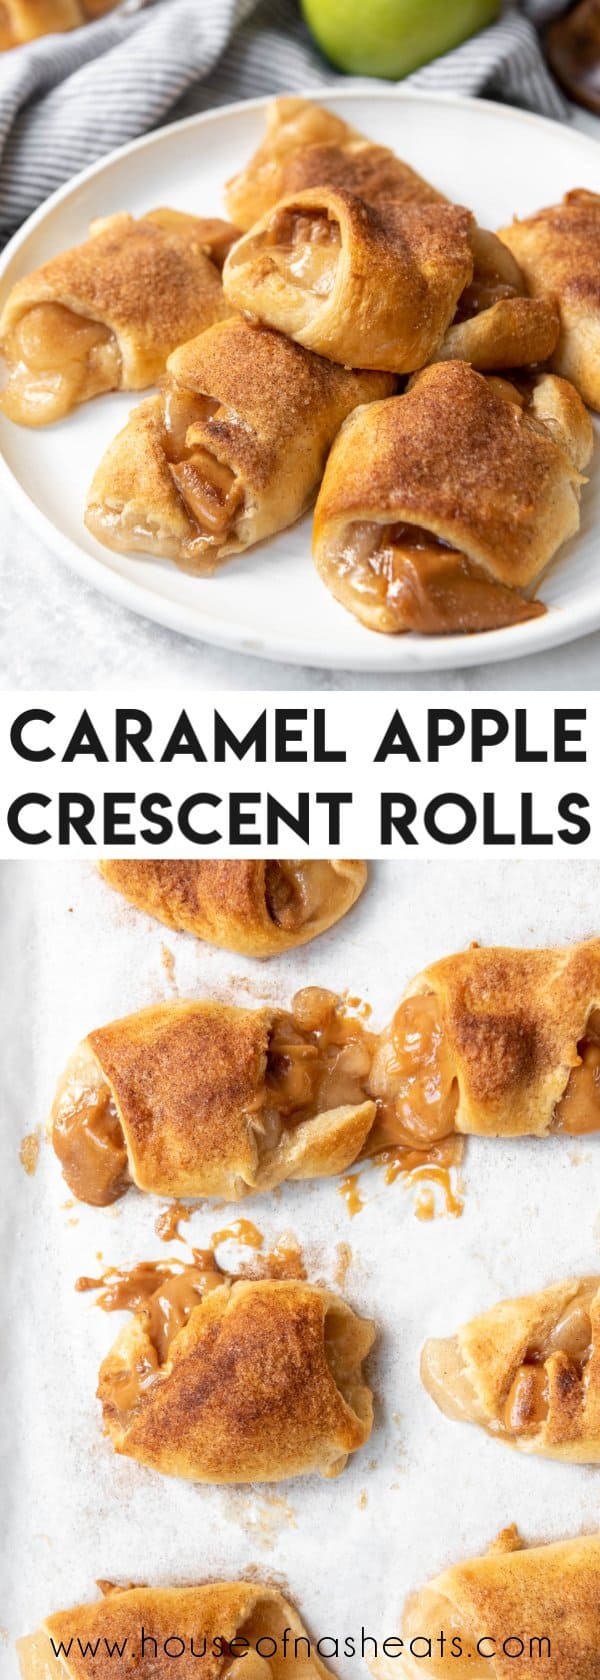 A collage of images of caramel apple pie crescent rolls with text overlay.